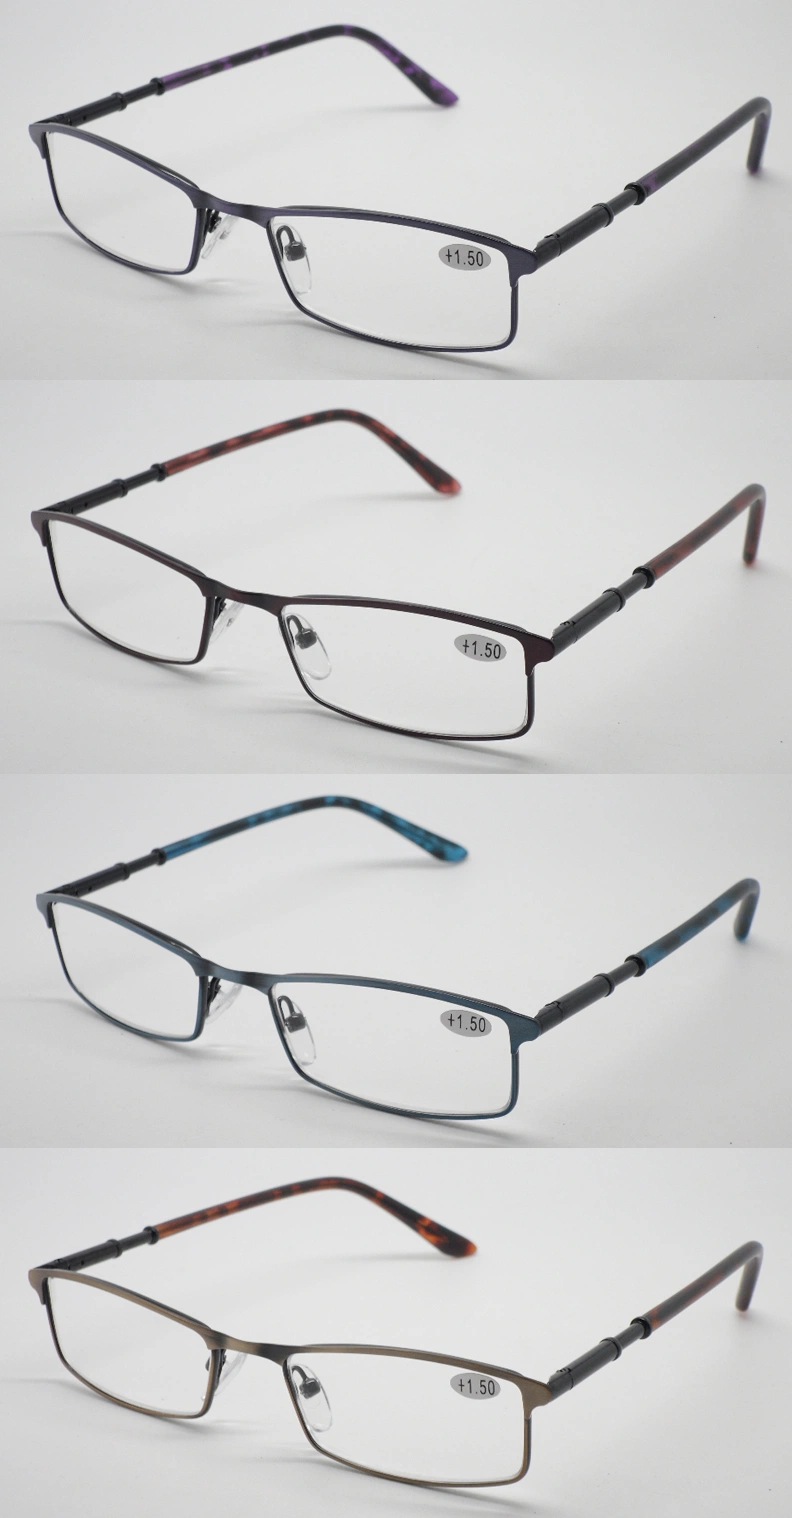 Hot Selling Reading Glasses with Spring Hinge